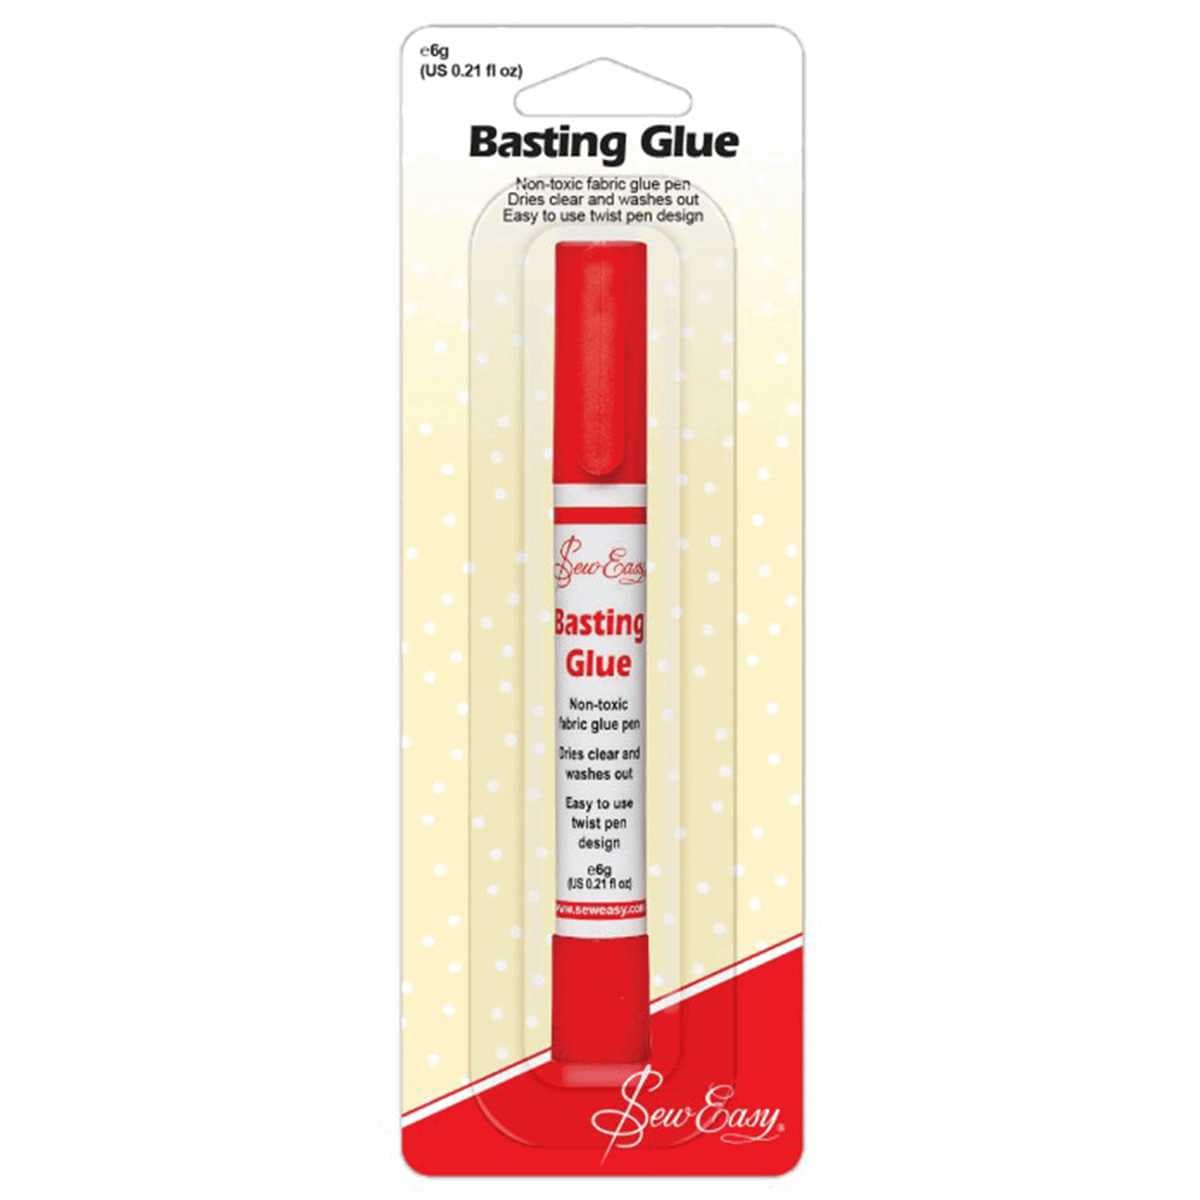 Aleene's Fabric Fusion Adhesive Pen - The Sewing Place